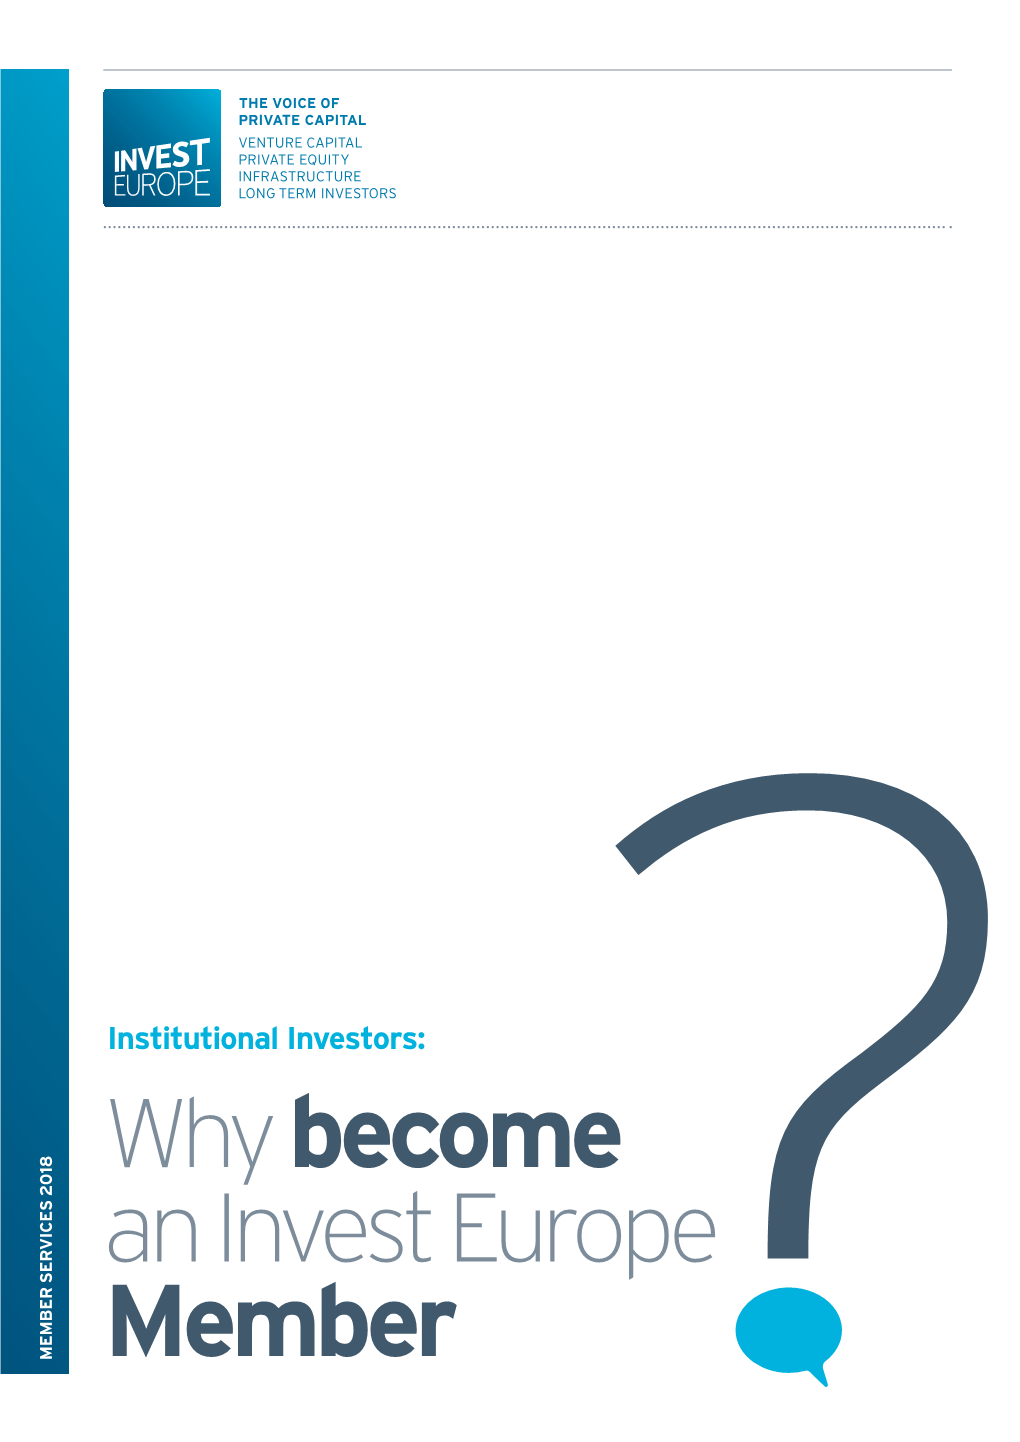 IE Institutional Investors Brochure 180723 AW.Indd